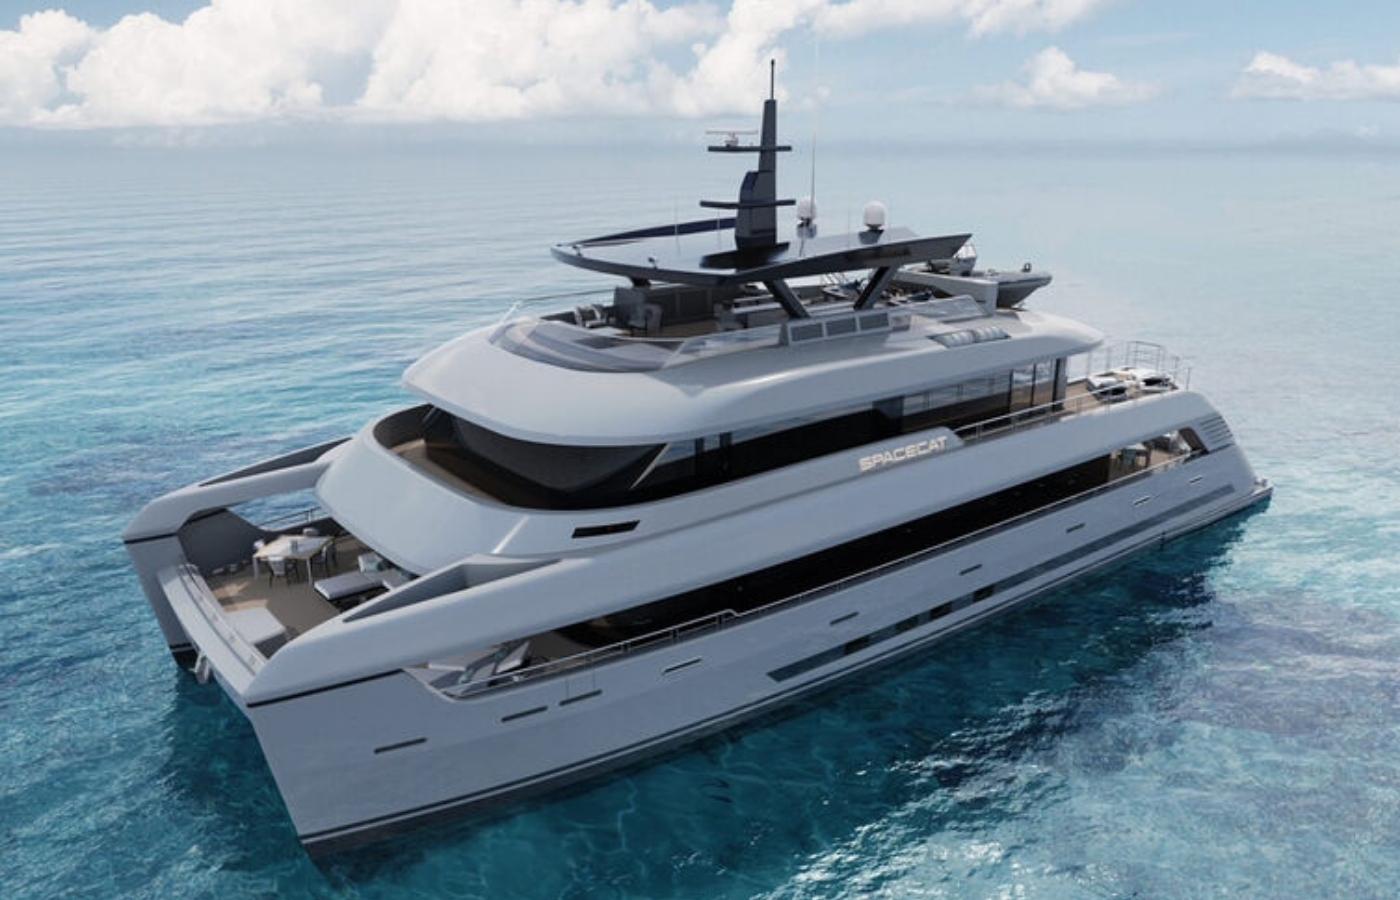 First look onboard SilverYachts’ 36m SpaceCat catamaran [In the News]